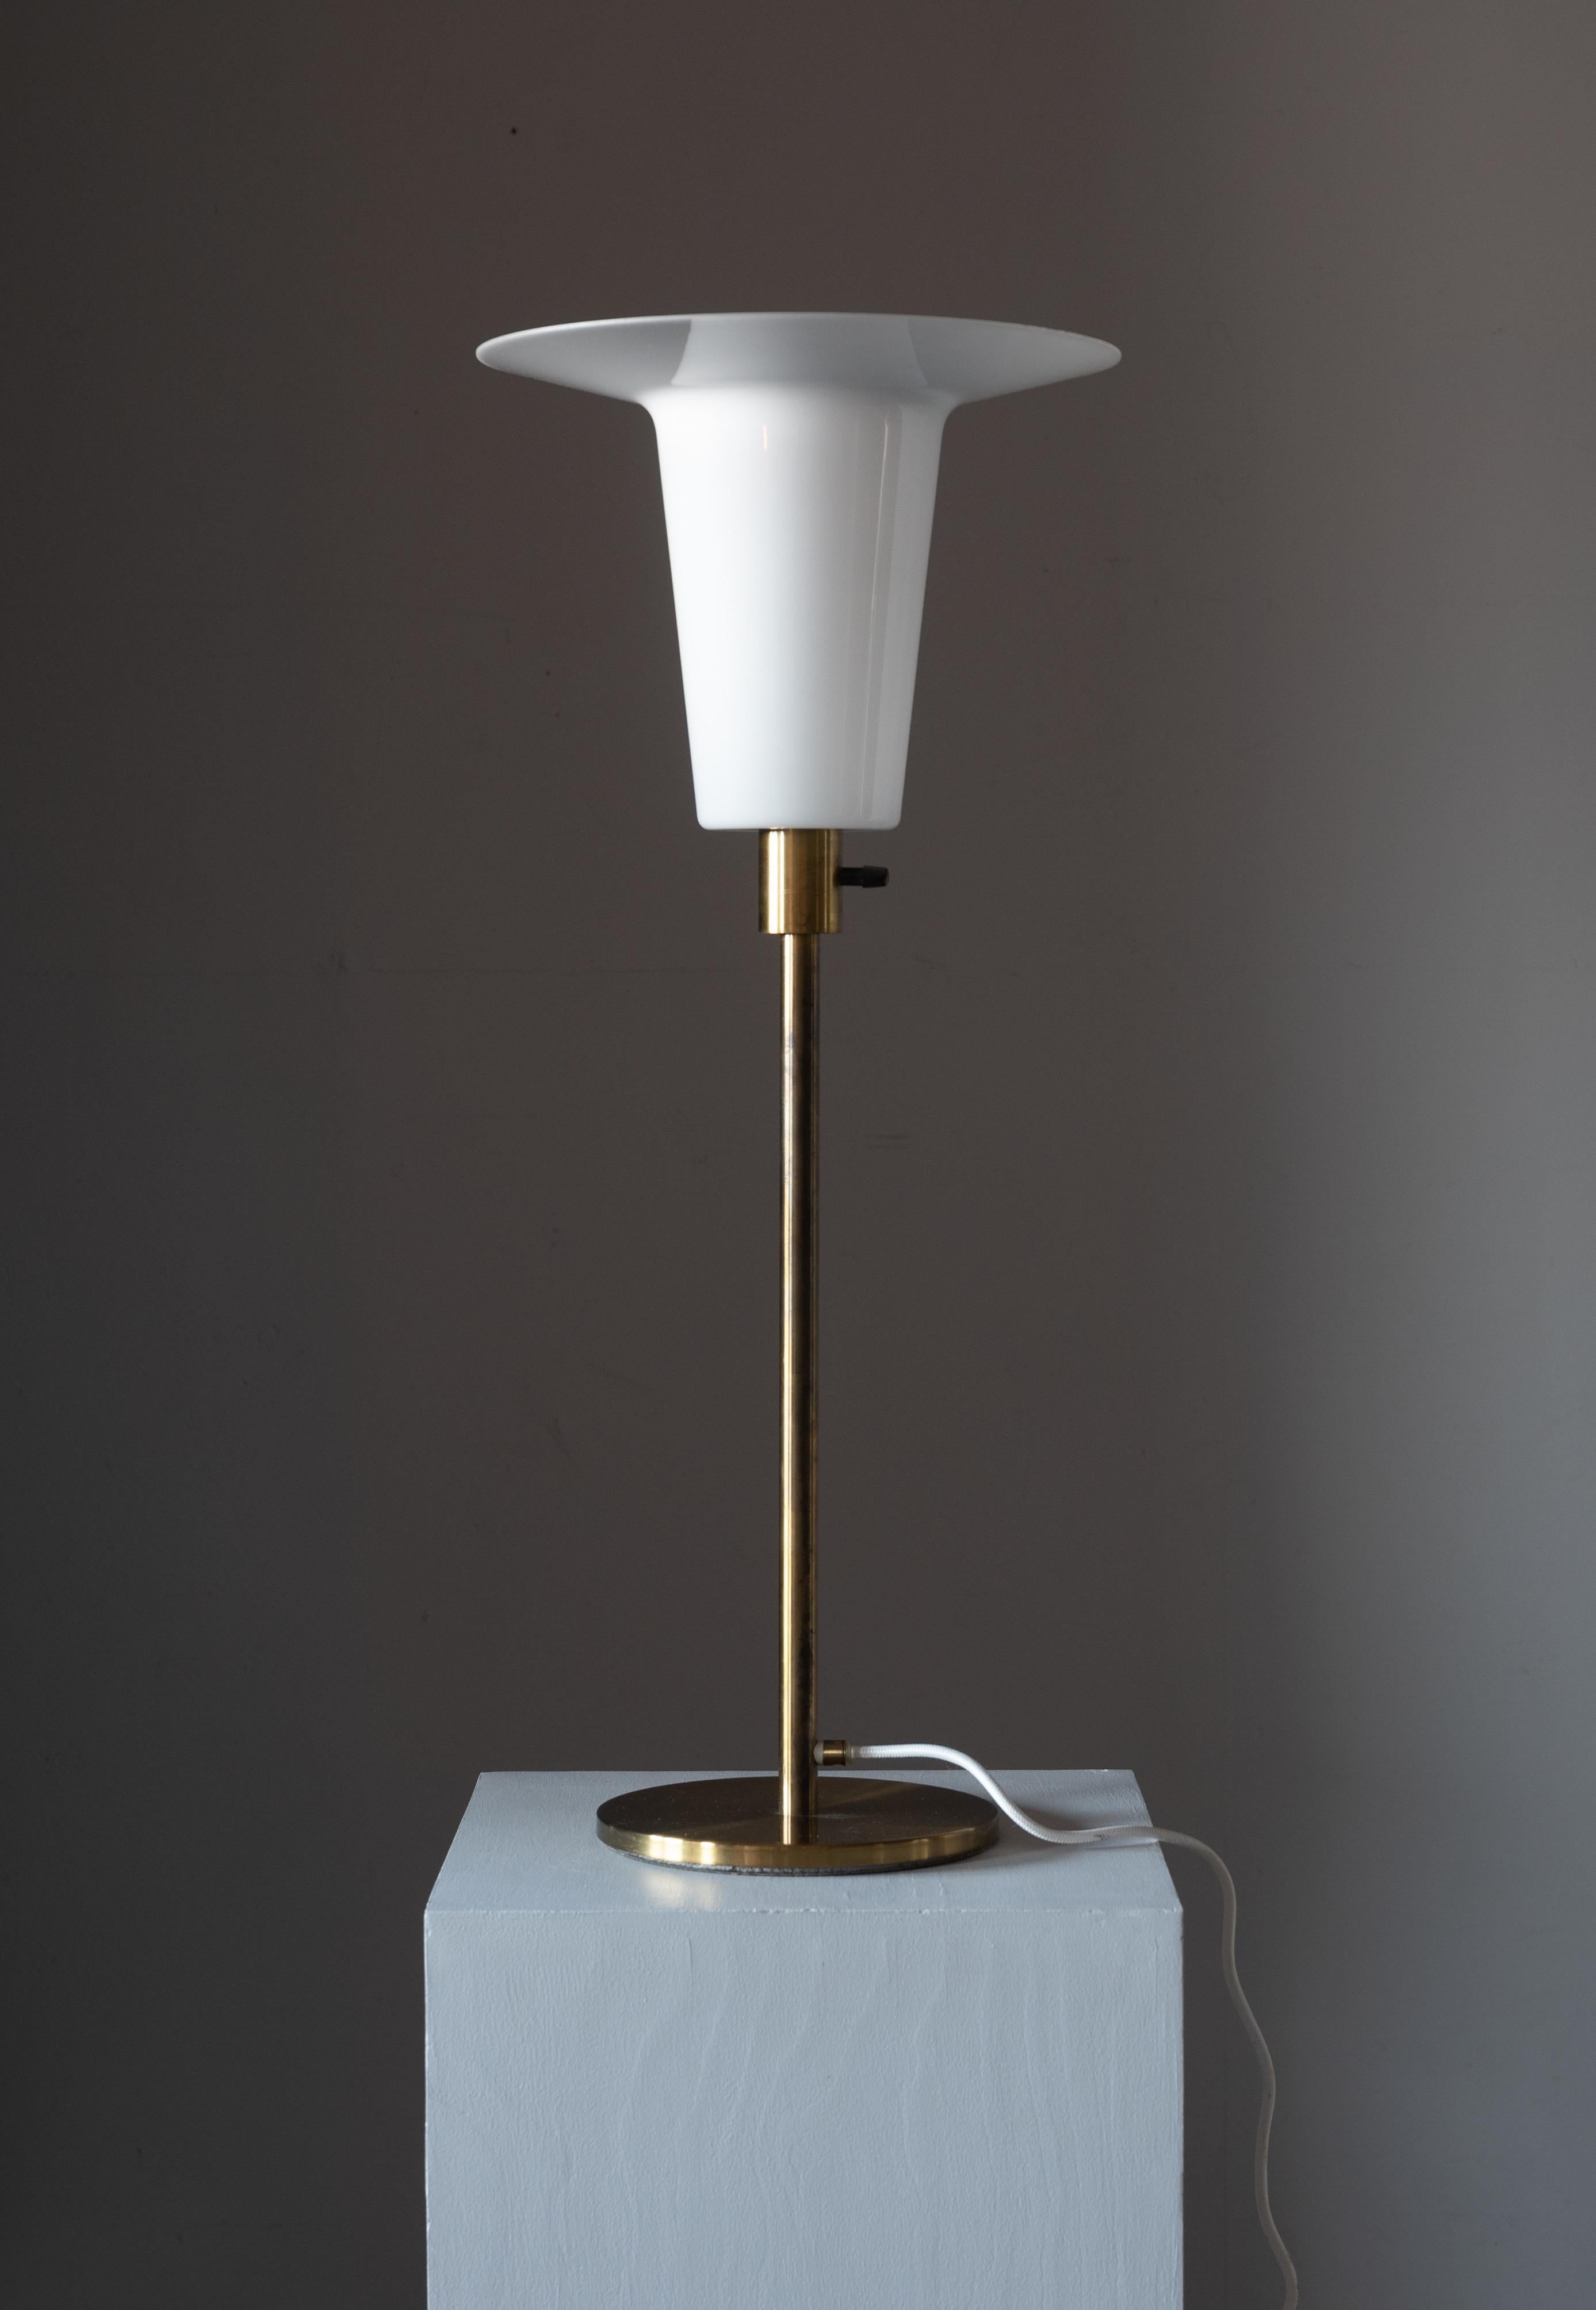 A large brass table lamp. Designed by Wolfgang Haase, for Luxus, Sweden, 1967. Labeled.

Original acrylic diffuser.

Other designers of the period include Axel Einar Hjorth, Roland Wilhelmsson, Charlotte Perriand, Pierre Chapo, and Yasha Heifetz.